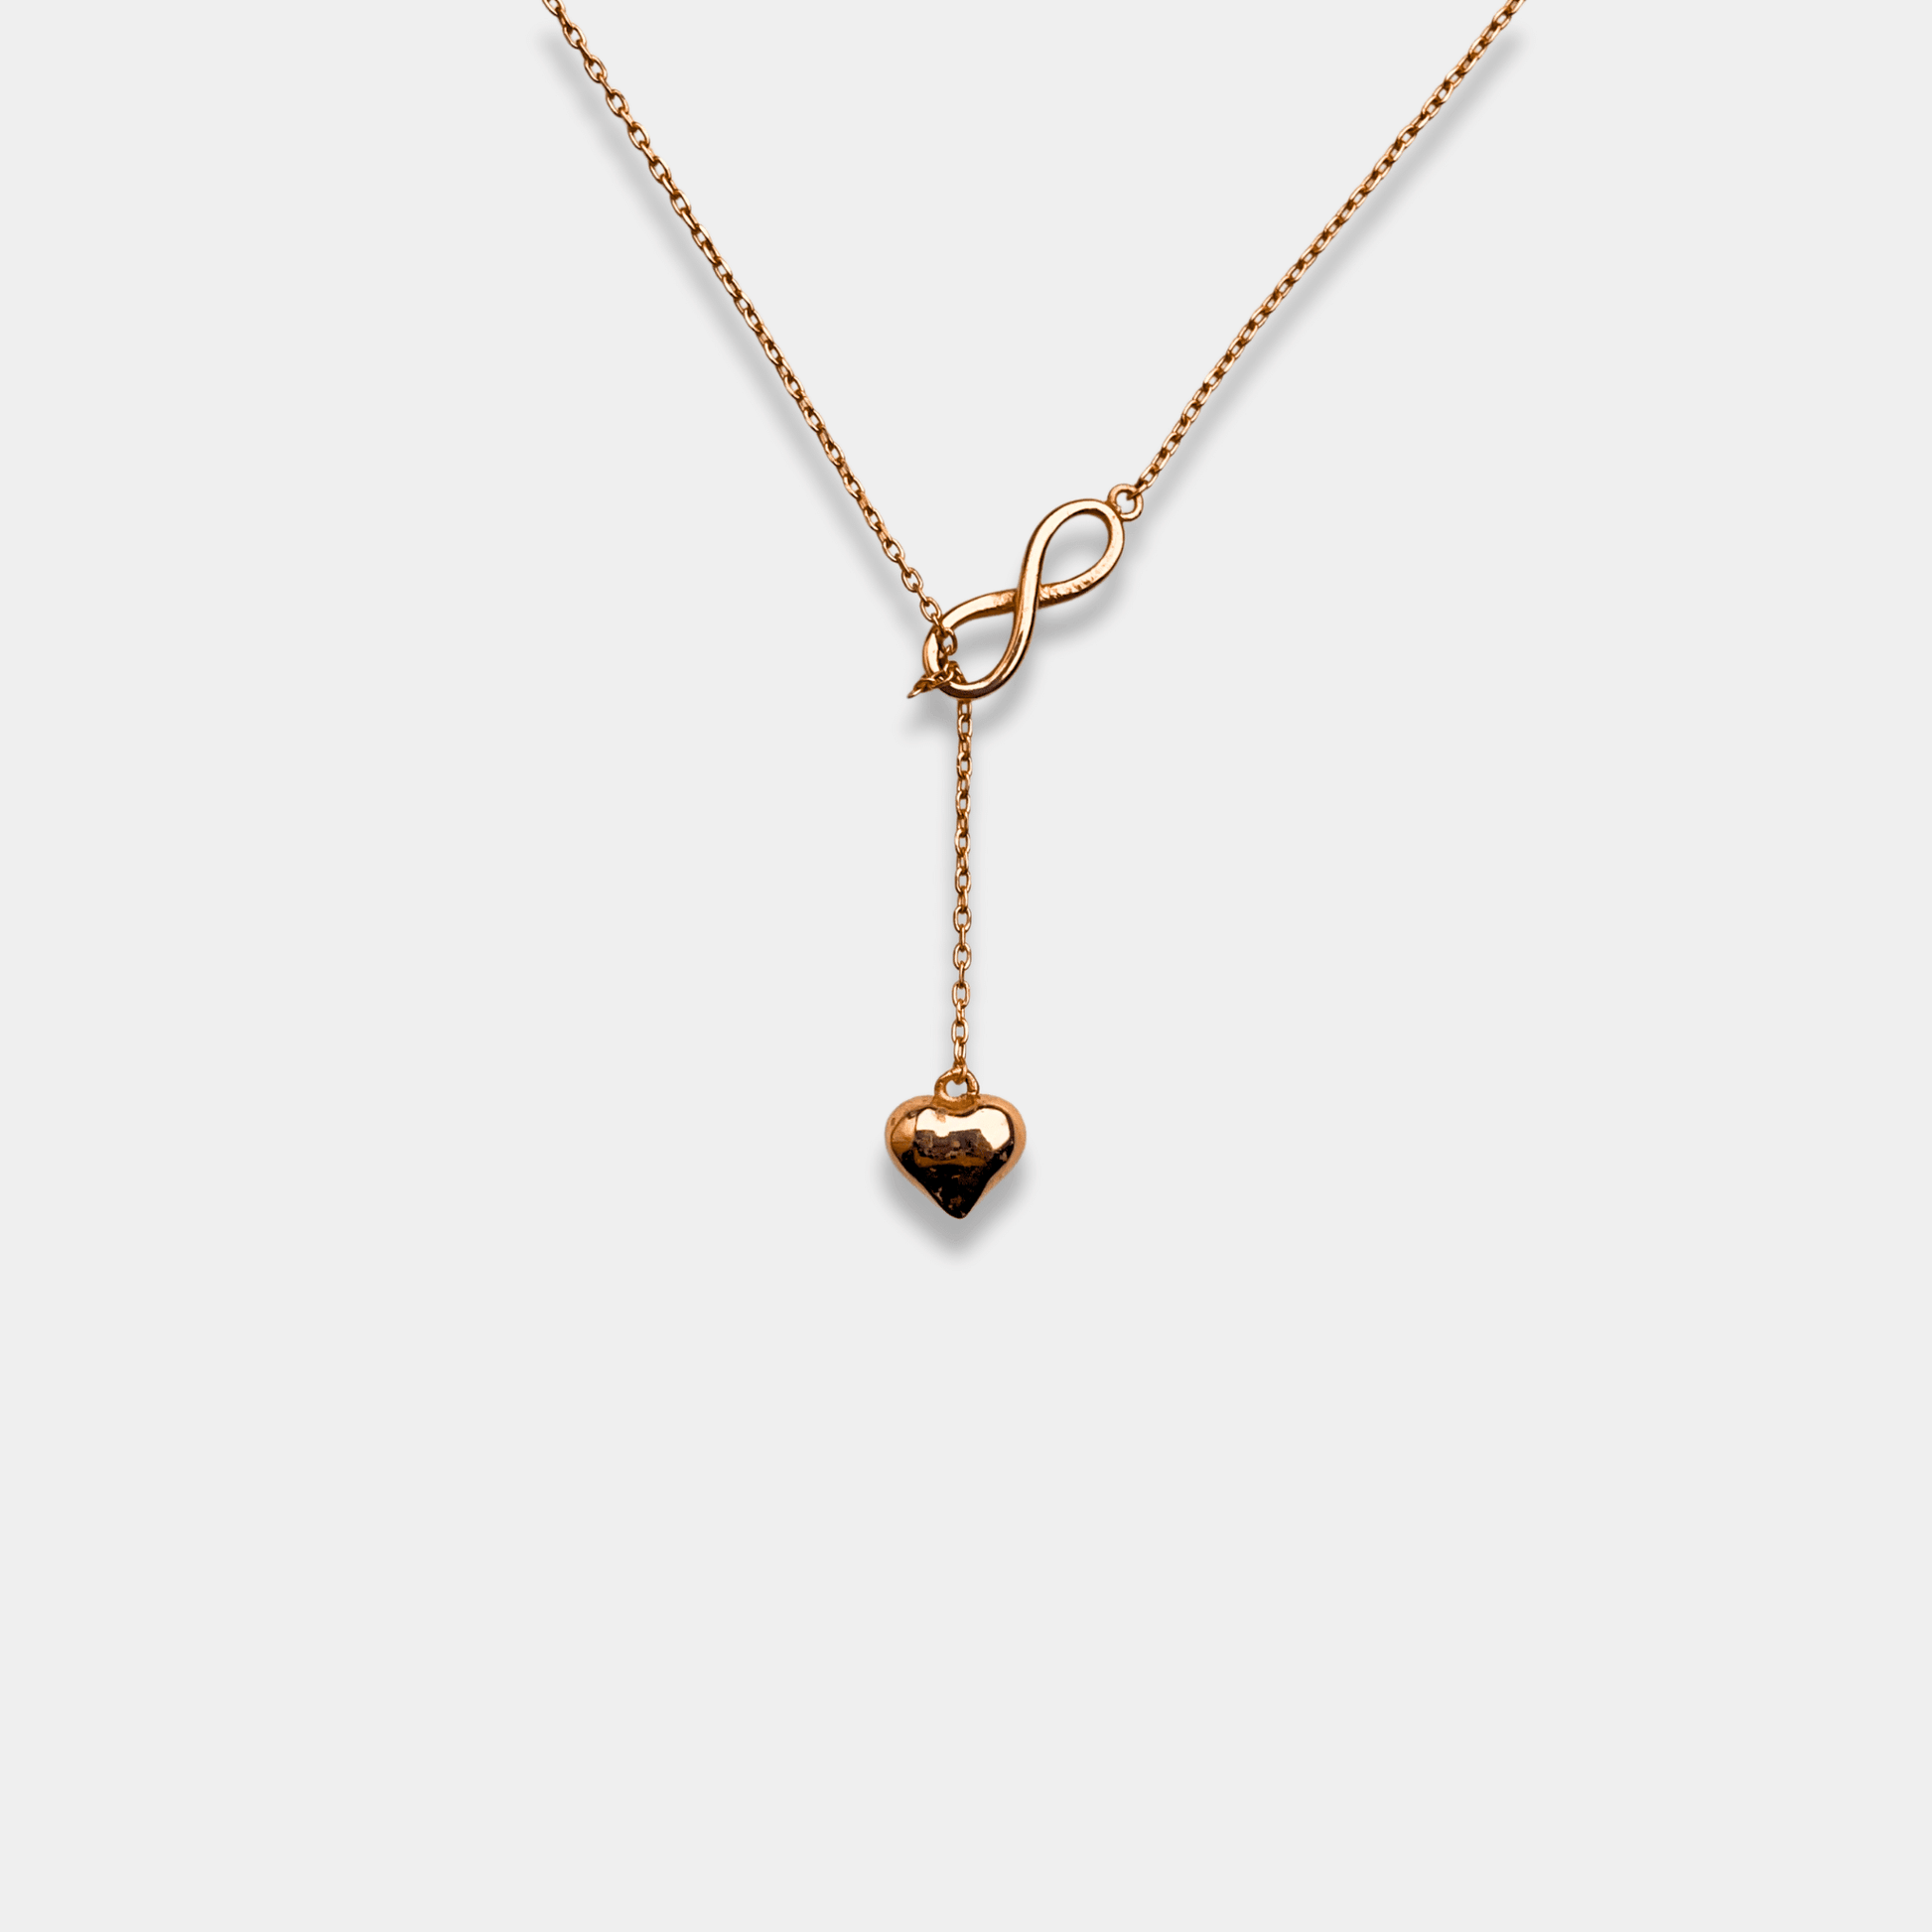  Discover the elegance of our rose gold Love Raindrop Pendant - a timeless symbol of love and beauty.